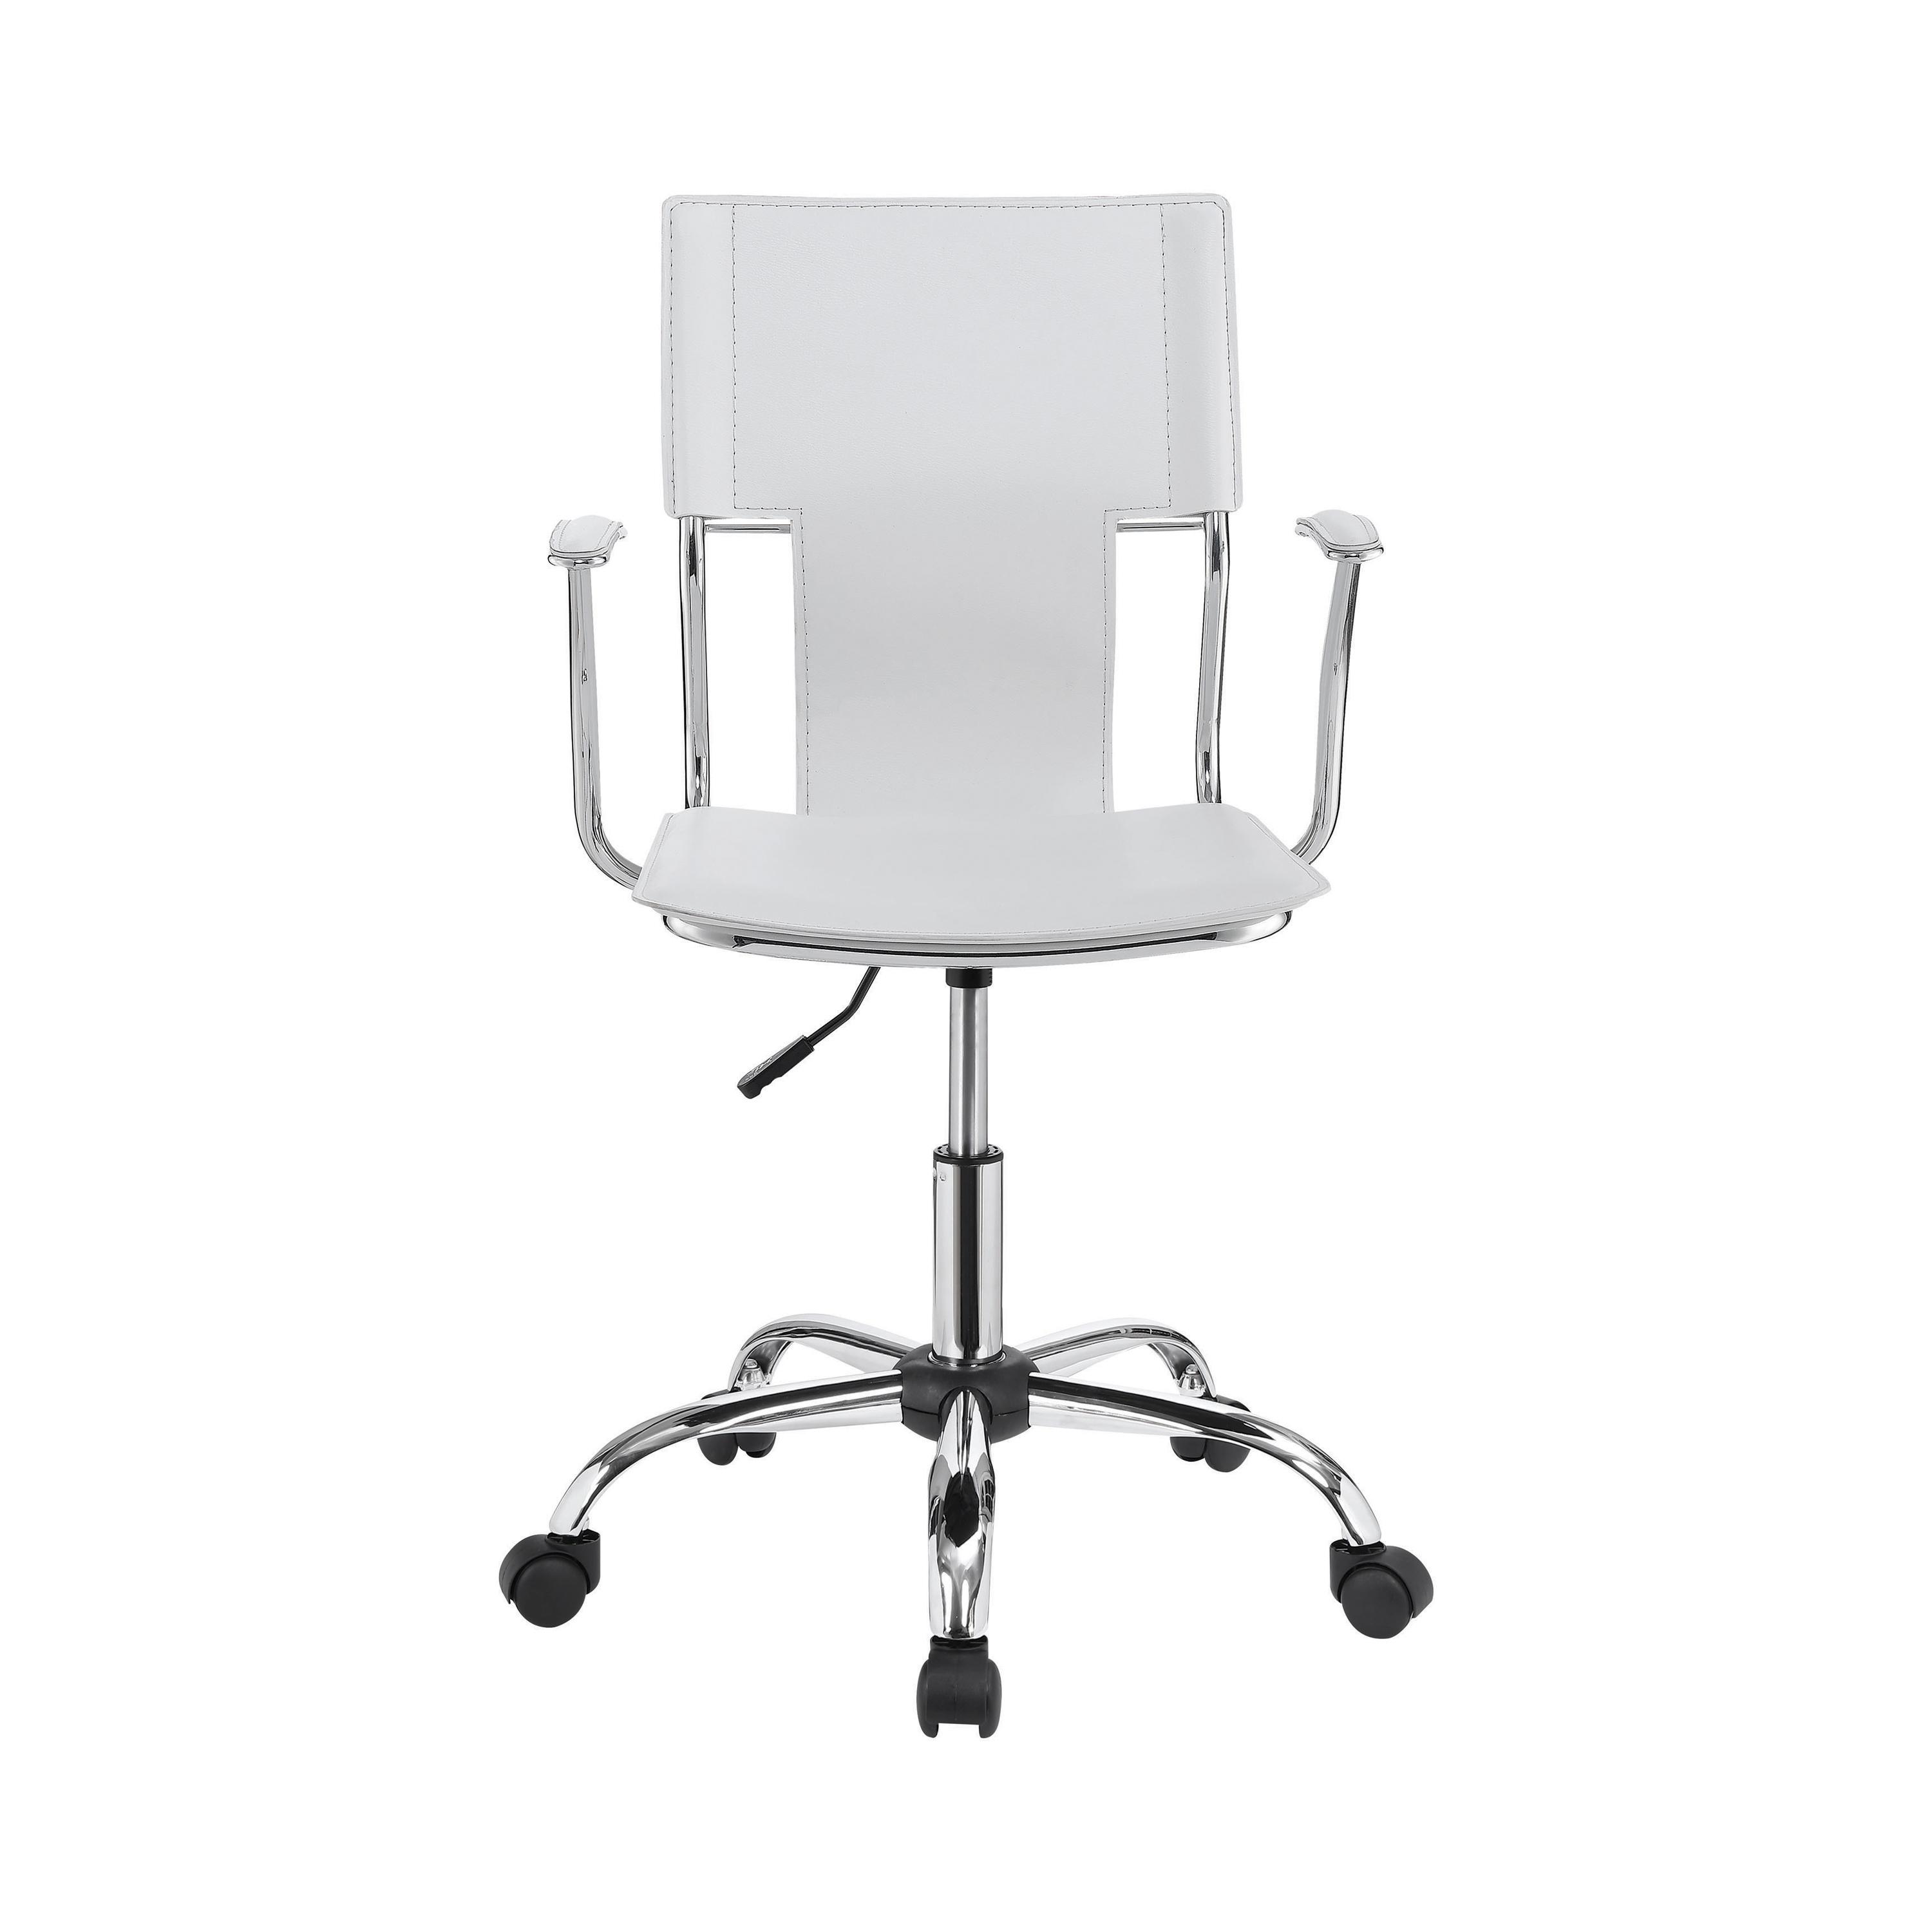 Coaster 801363 Office Chair